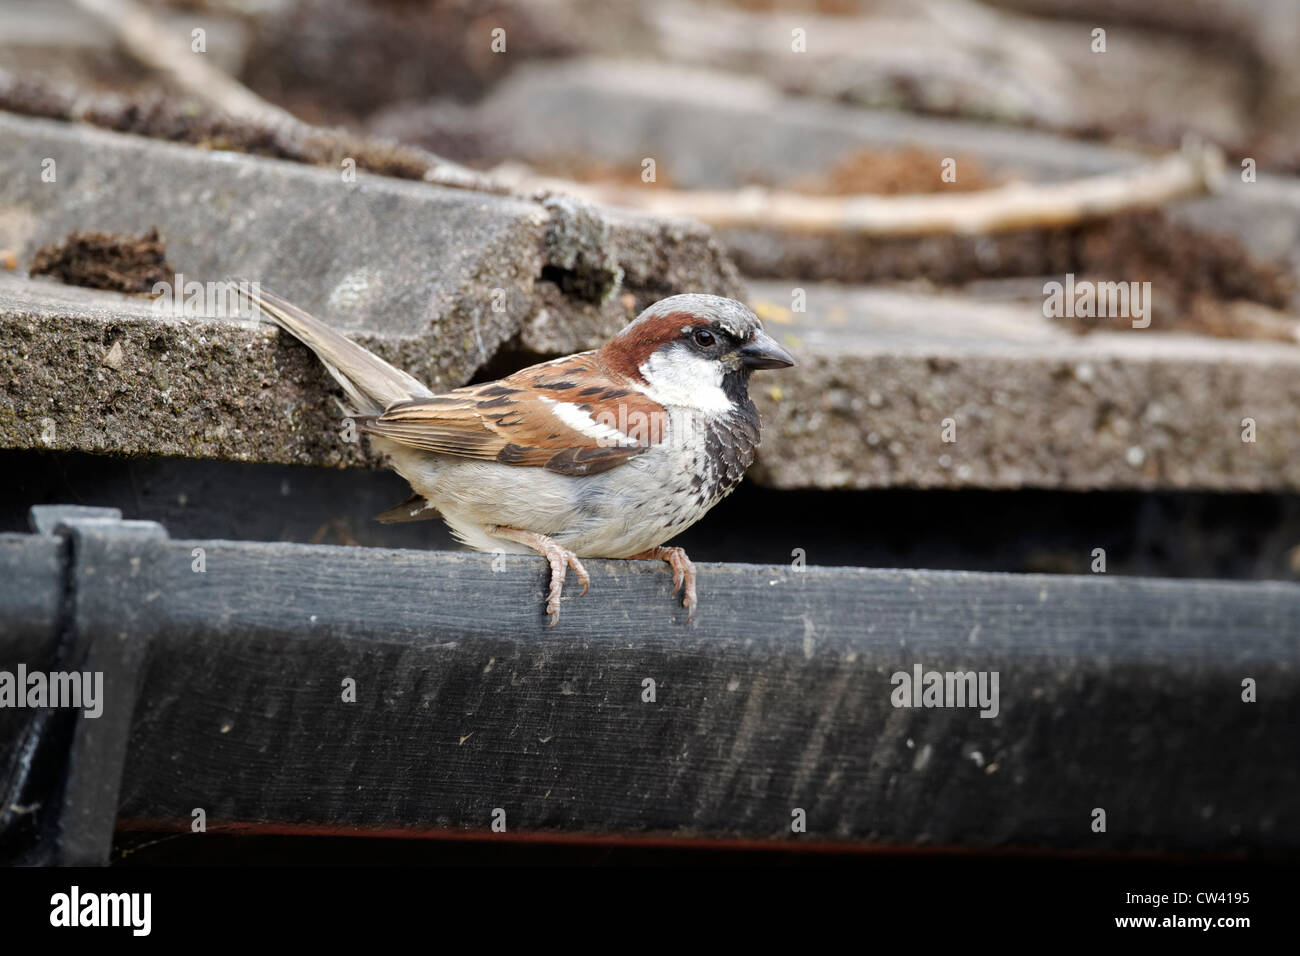 House sparrow, Passer domesticus. single male on tiled roof, Staffordshire, August 2012 Stock Photo